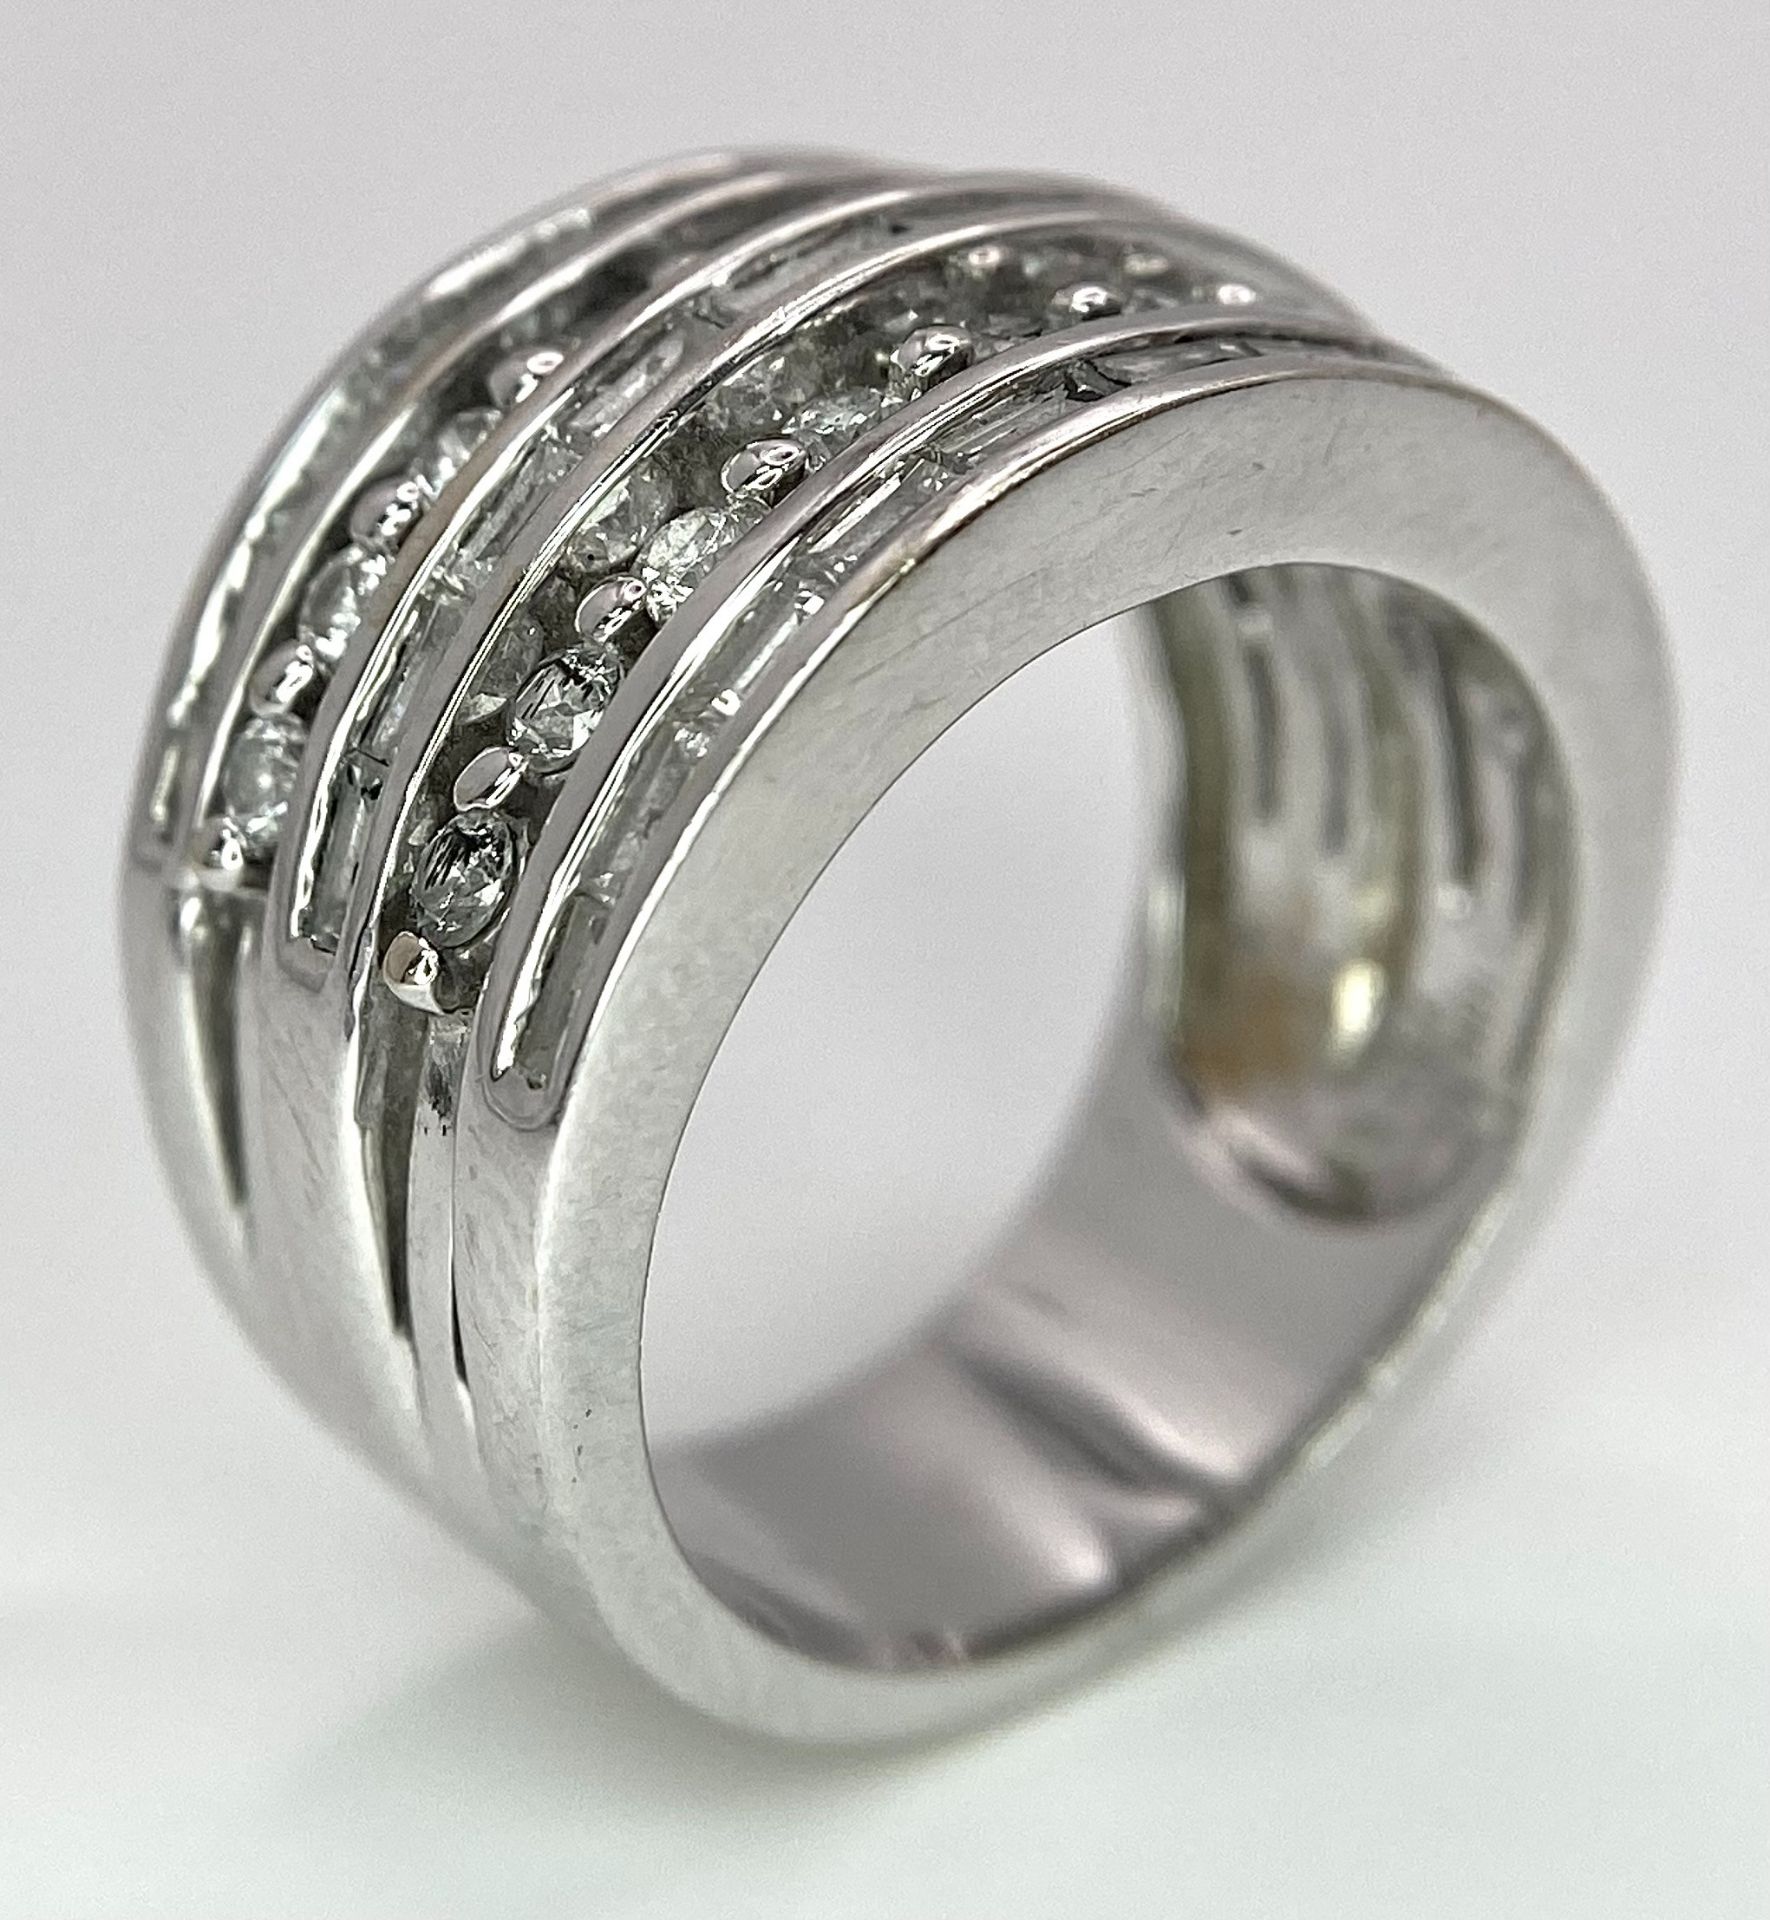 AN 18K WHITE GOLD 5 ROW DIAMOND RING. MIXTURE OF ROUND BRILLIANT CUTS AND BAGUETTE CUT DIAMONDS. - Image 3 of 9